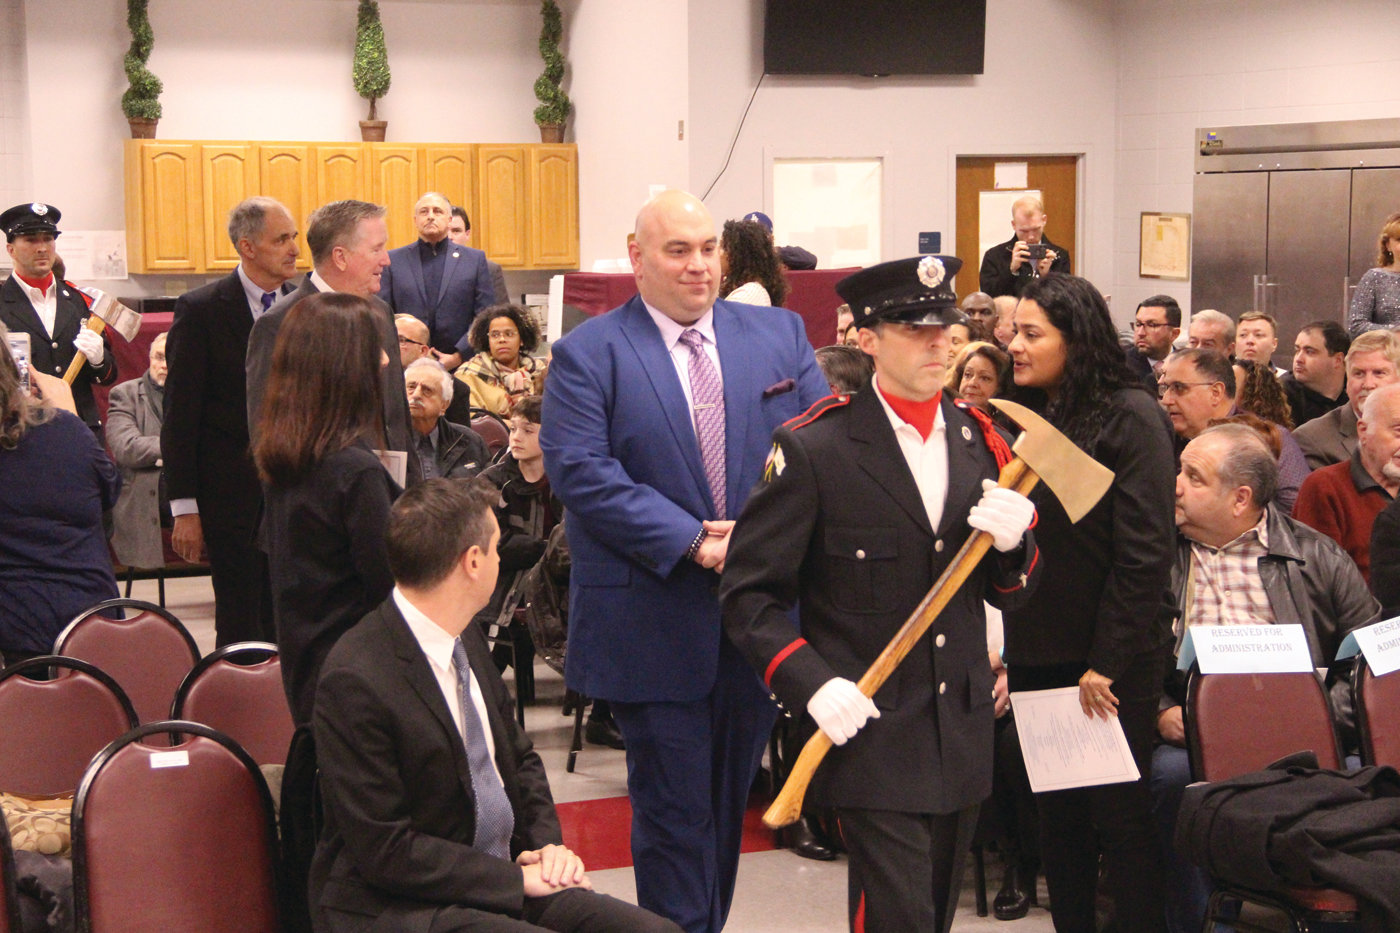 Escorted by the Cranston Fire Department color guard, Michael Farina, who was reelected City Council President, precedes his peers to the stage.